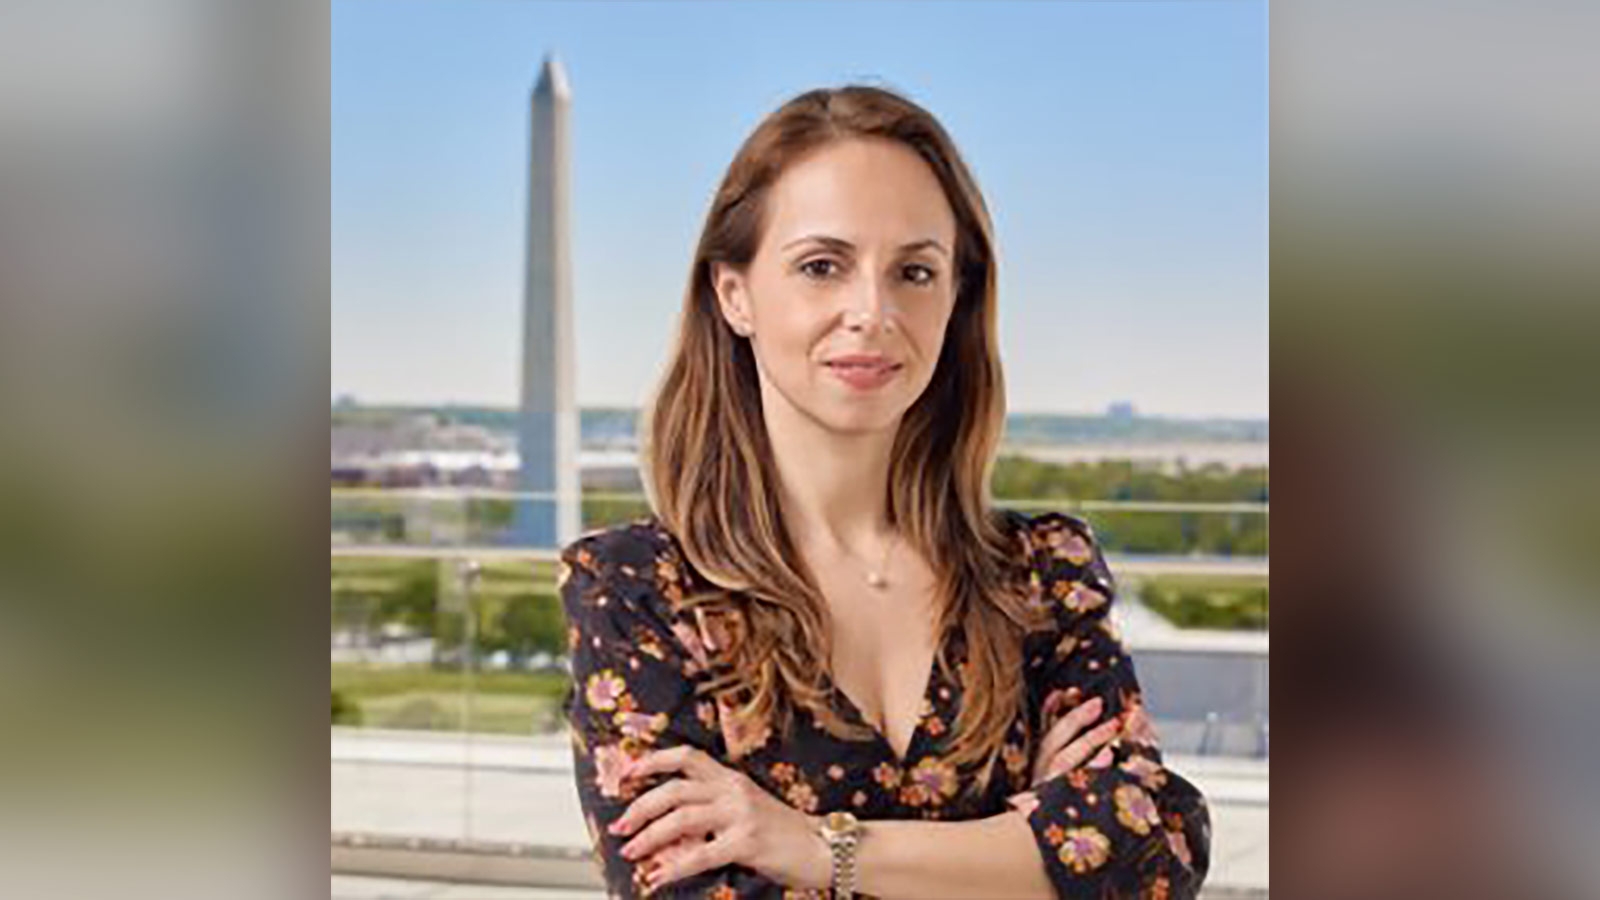 Missing DC real estate exec Ana Walshe owned multiple properties worth at least $1.88 million